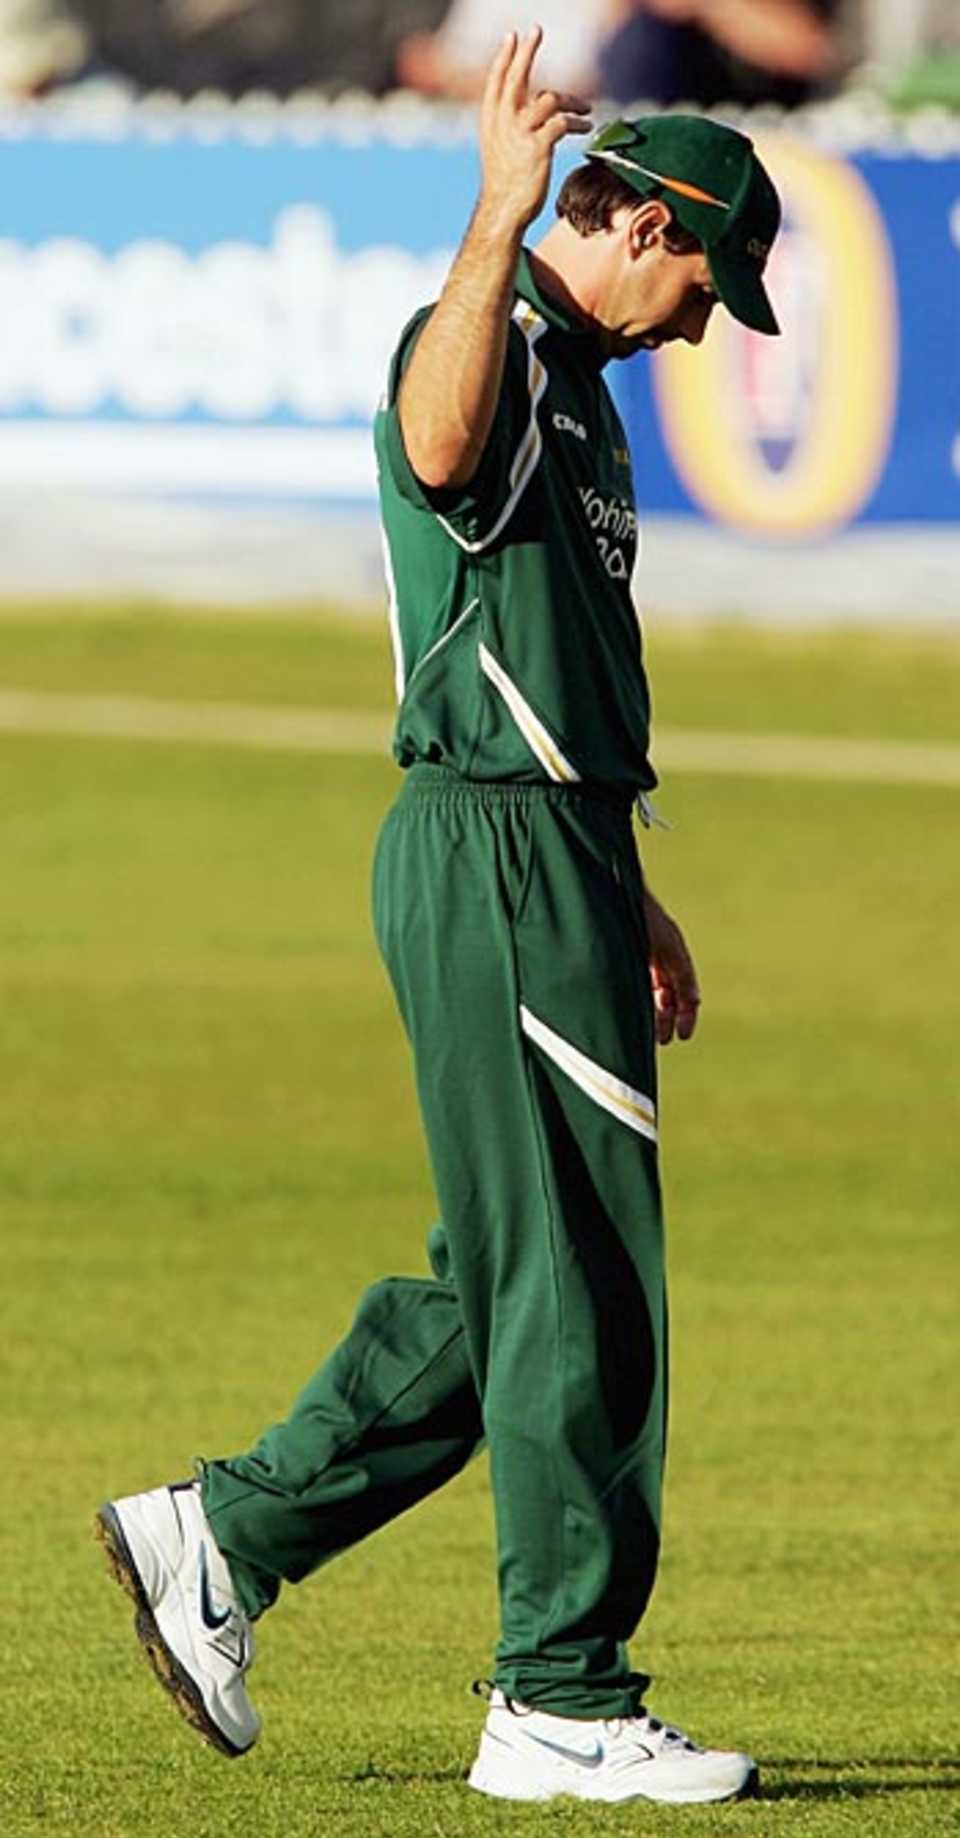 Stephen Fleming gives two fingers to the crowd after the day-night match at Derby was delayed by sunset, Derbyshire v Nottinghamshire, Derby, June 2, 2006